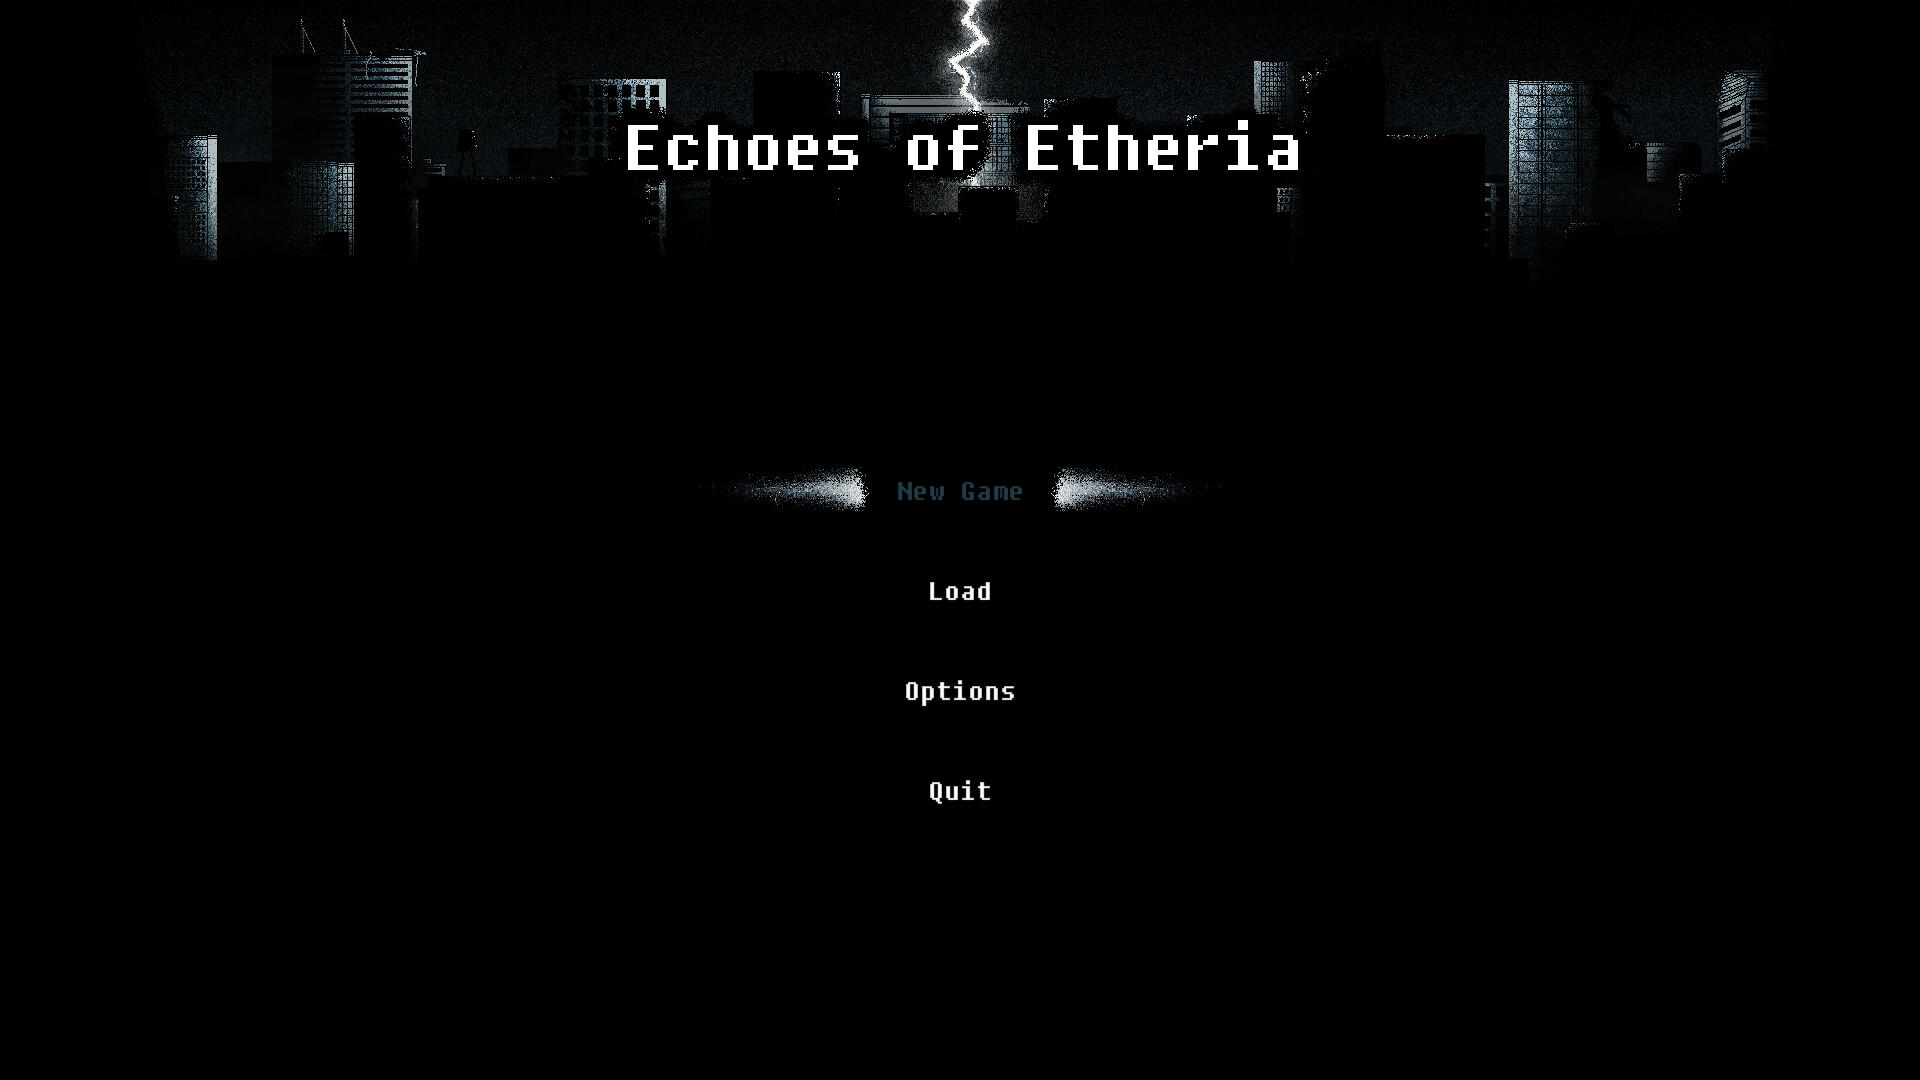 Echoes of Etheria screenshot game